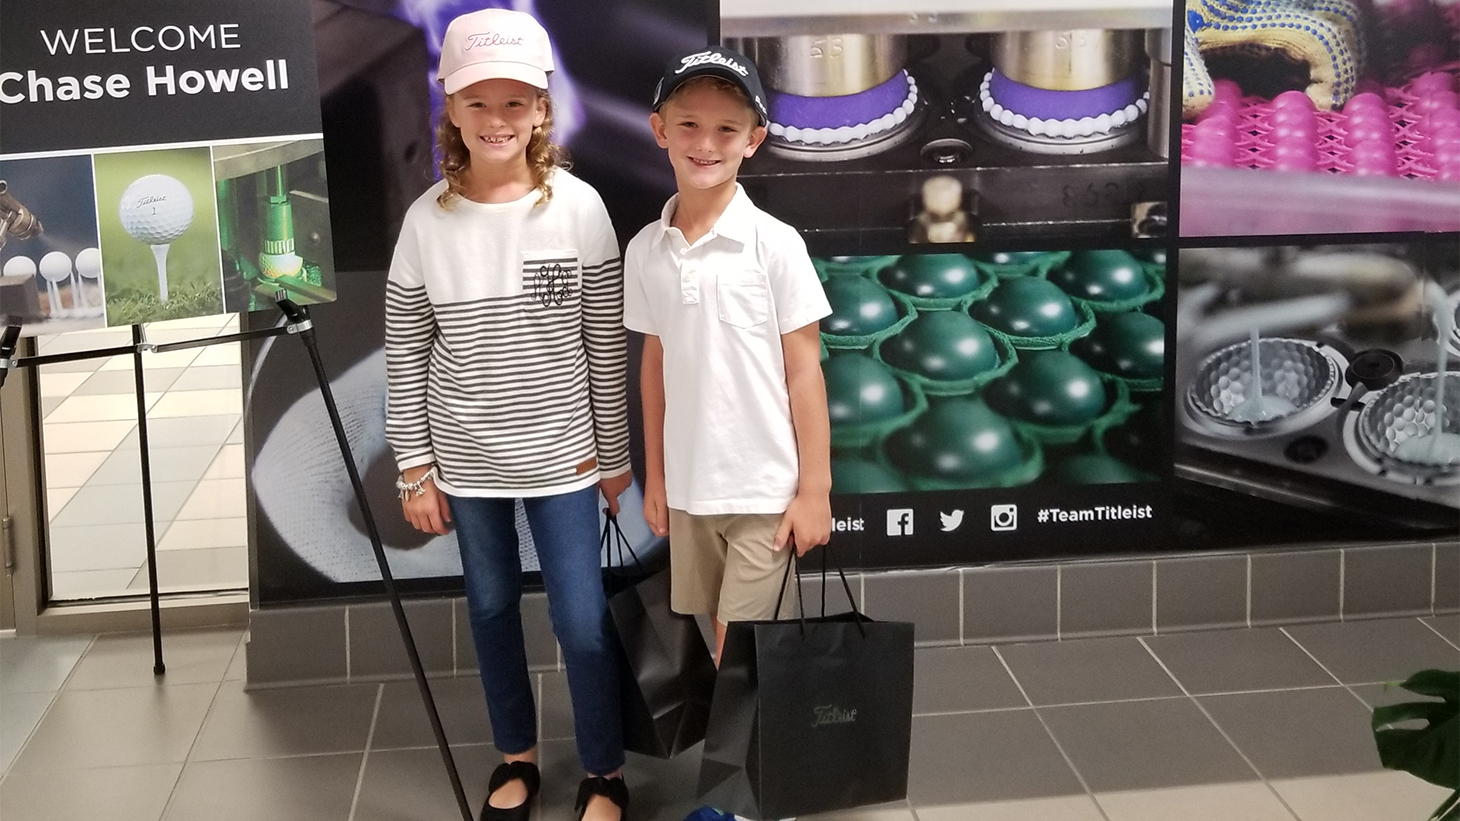 Ansley (left) and Chase Howell (right) at Titleist...